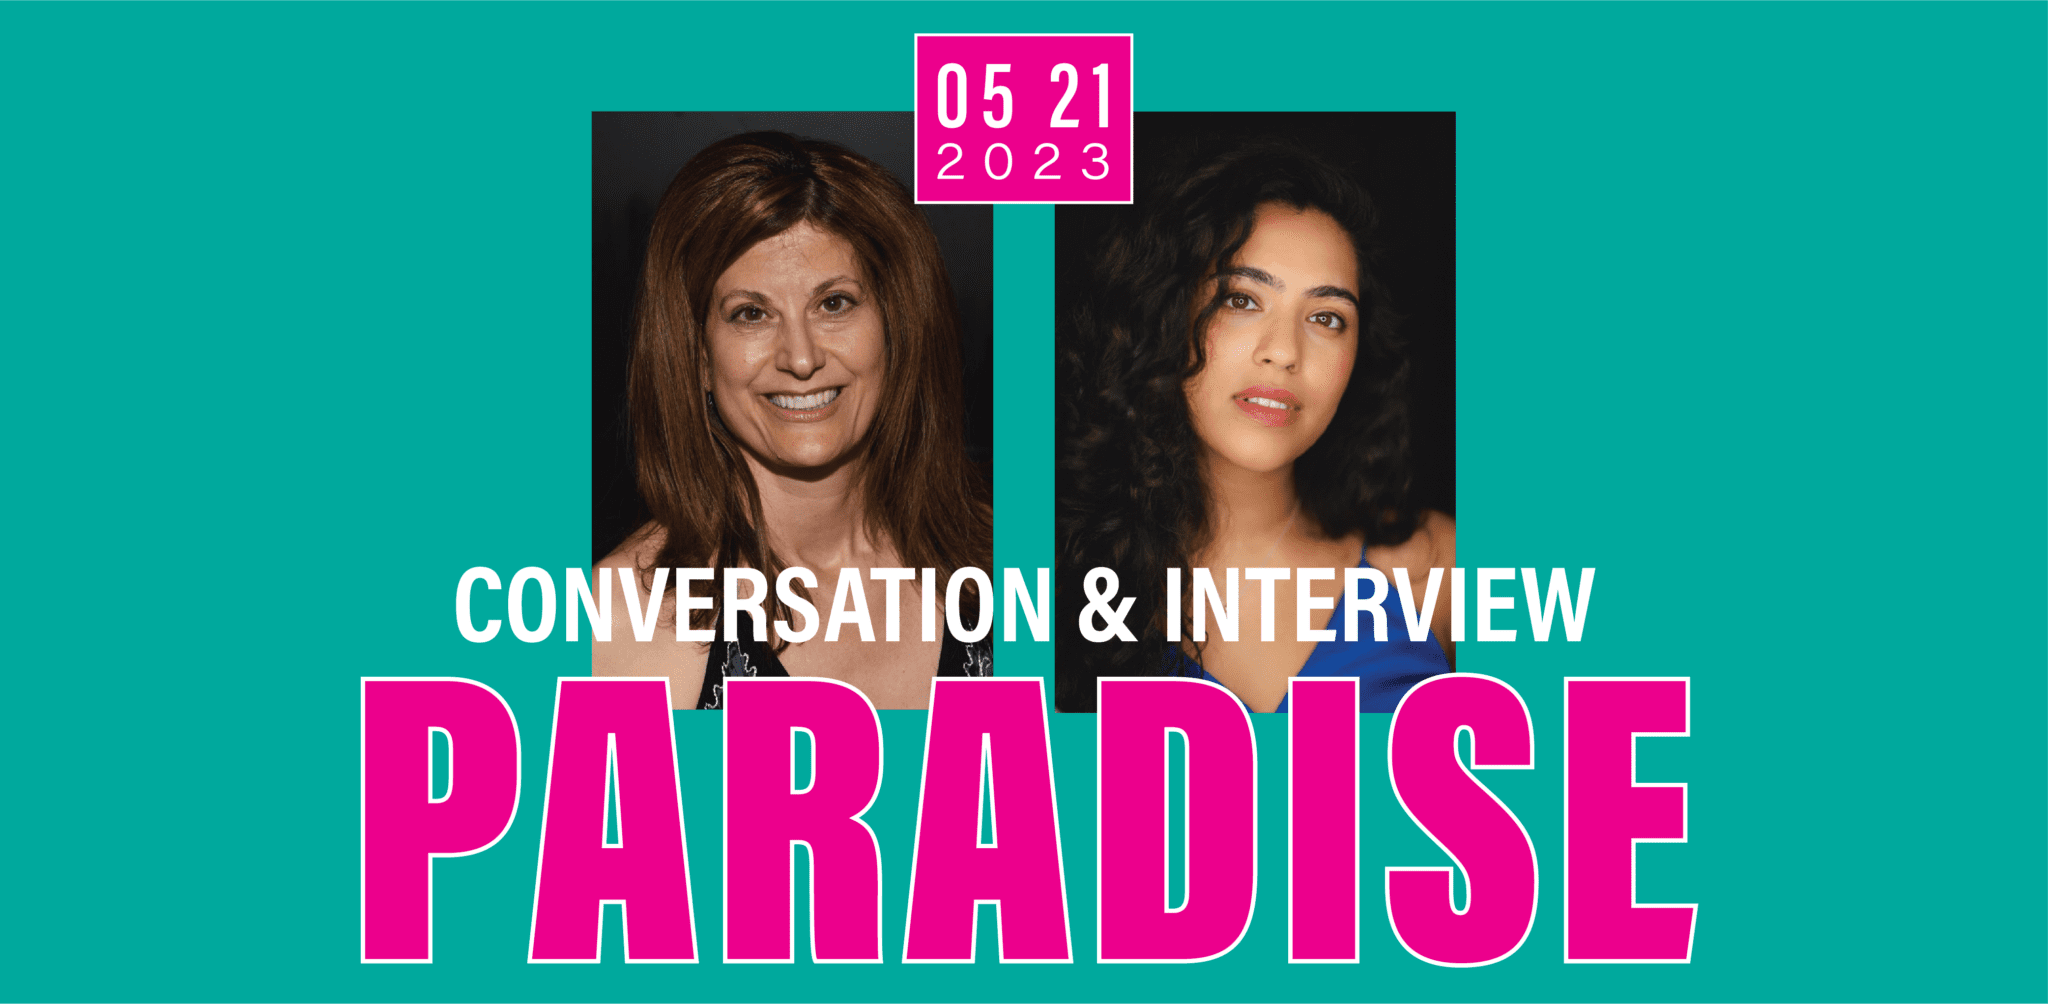 “Paradise” On-stage Coversation & Interview